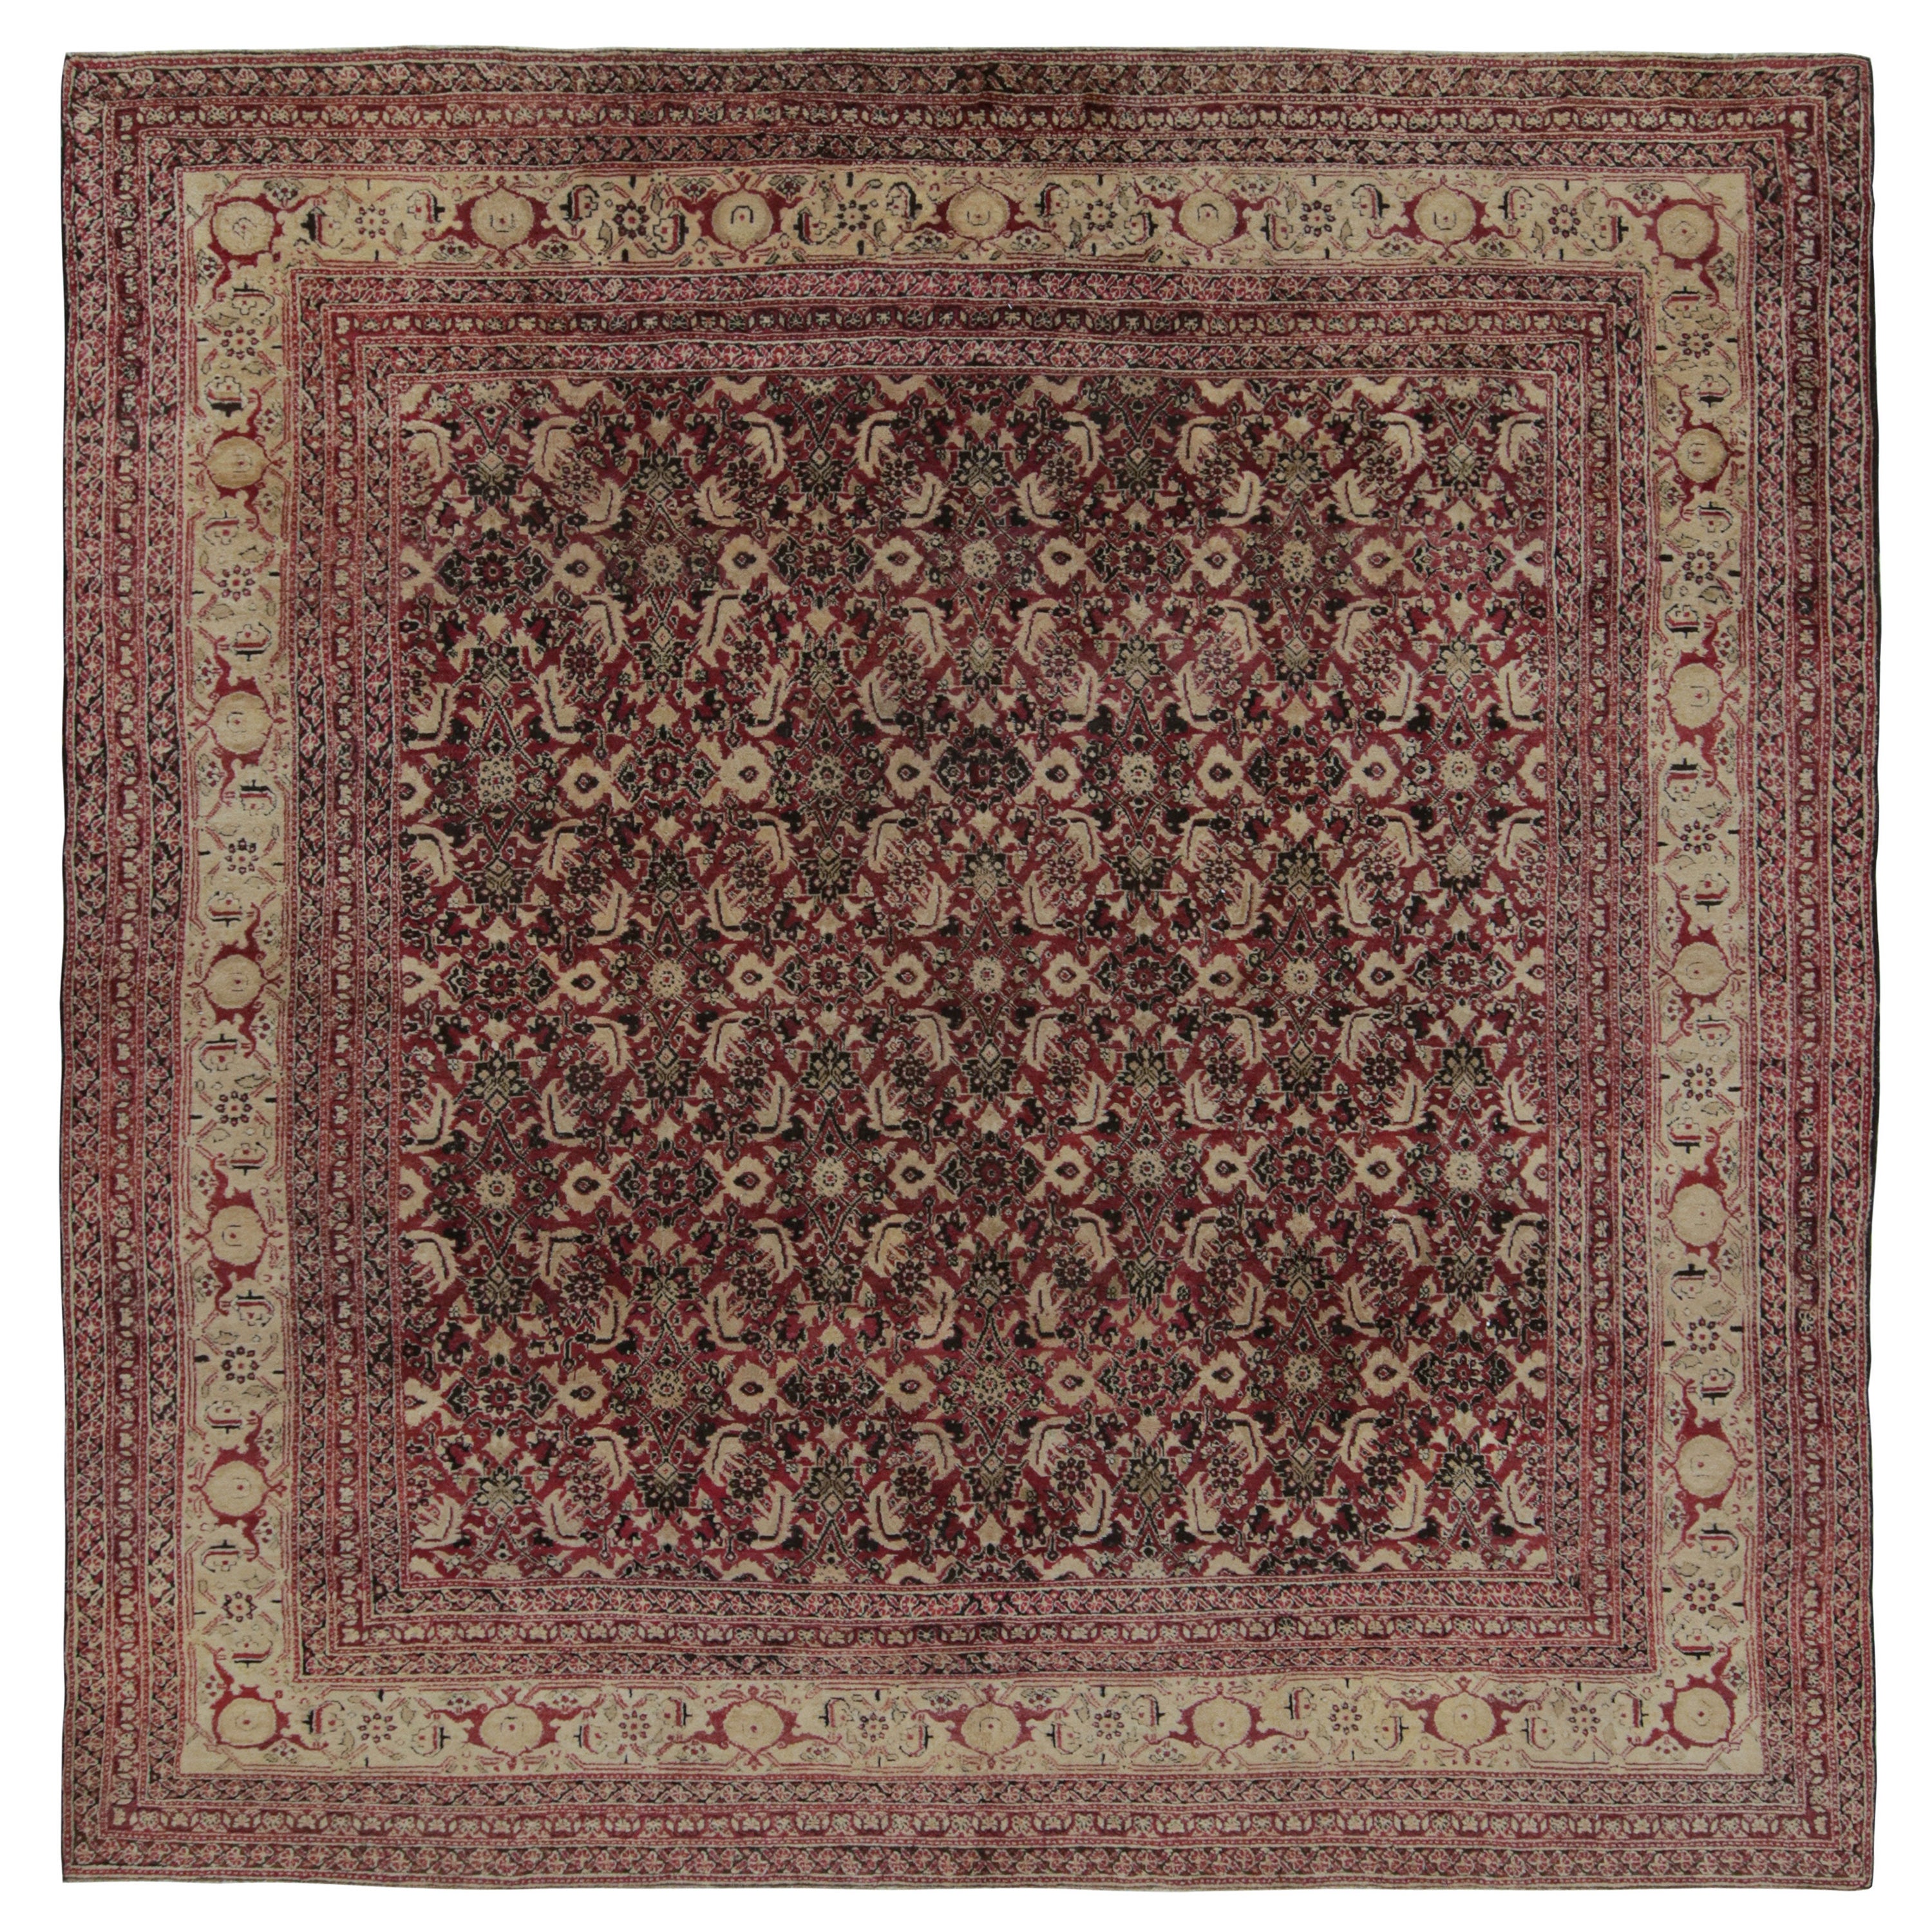 Antique Agra Square Rug in Burgundy with Floral Patterns, from Rug & Kilim For Sale